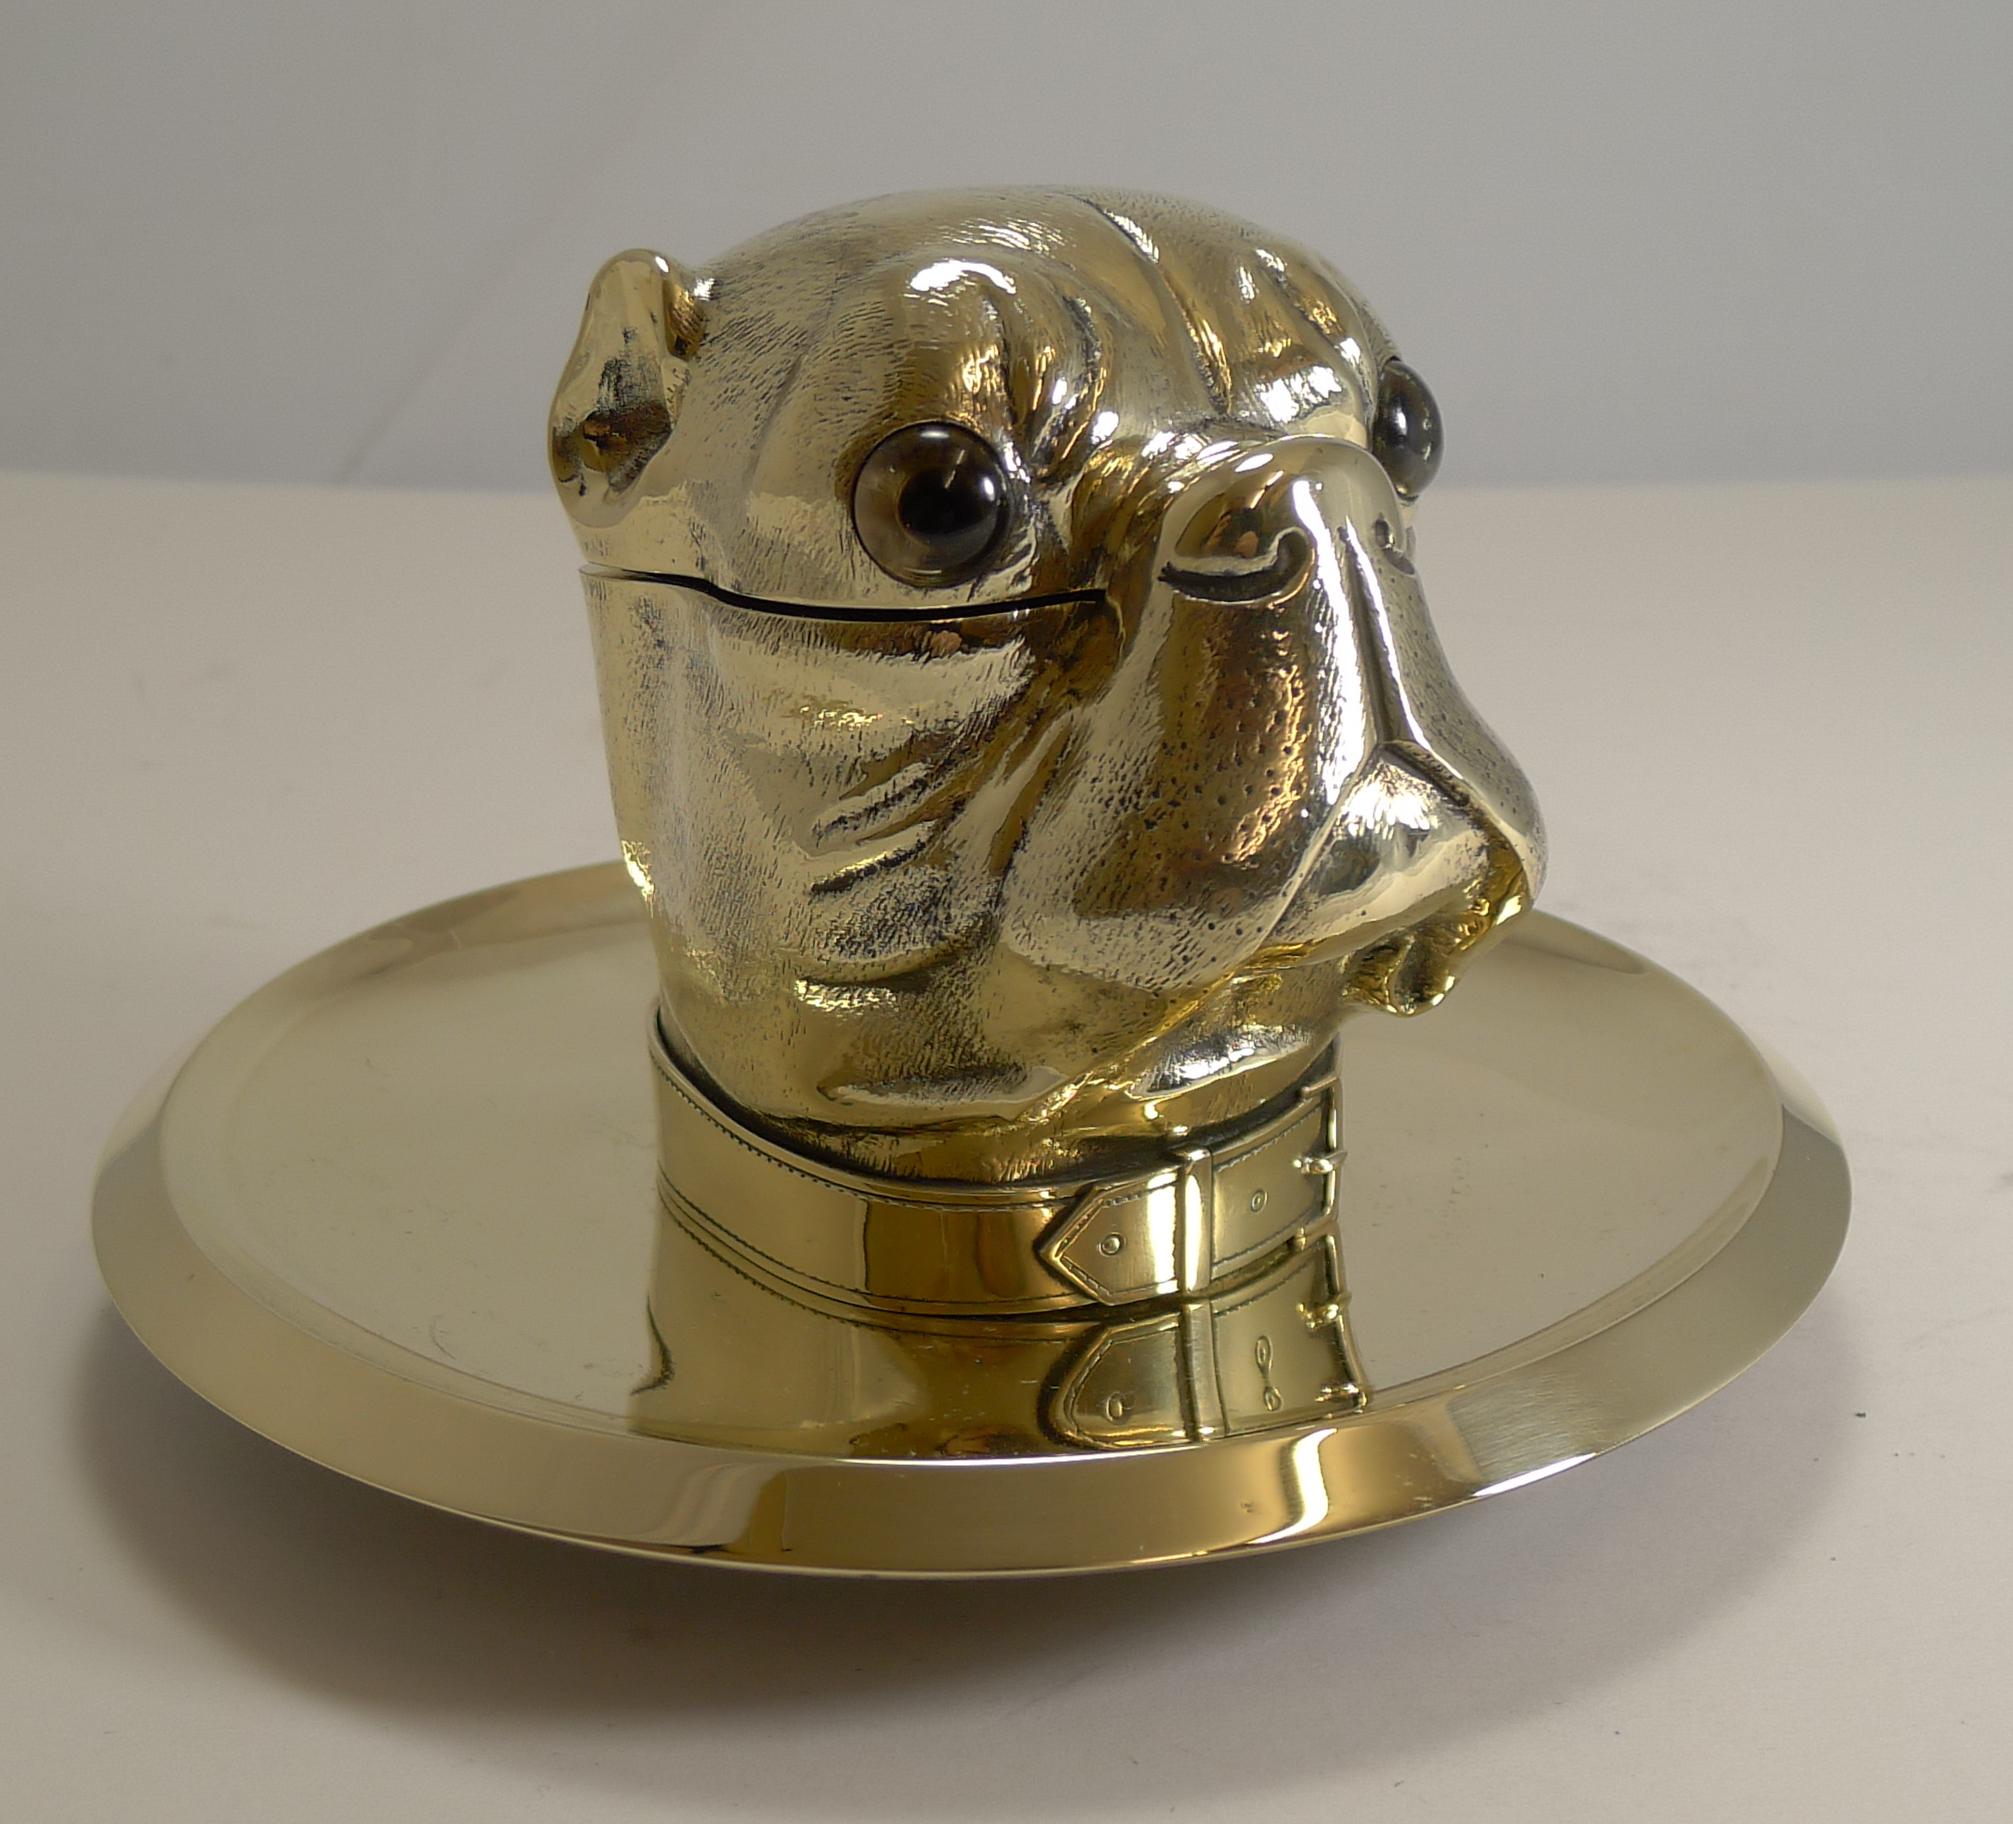 Grand English Bulldog Novelty Inkwell with Glass Eyes, circa 1880 For Sale 3